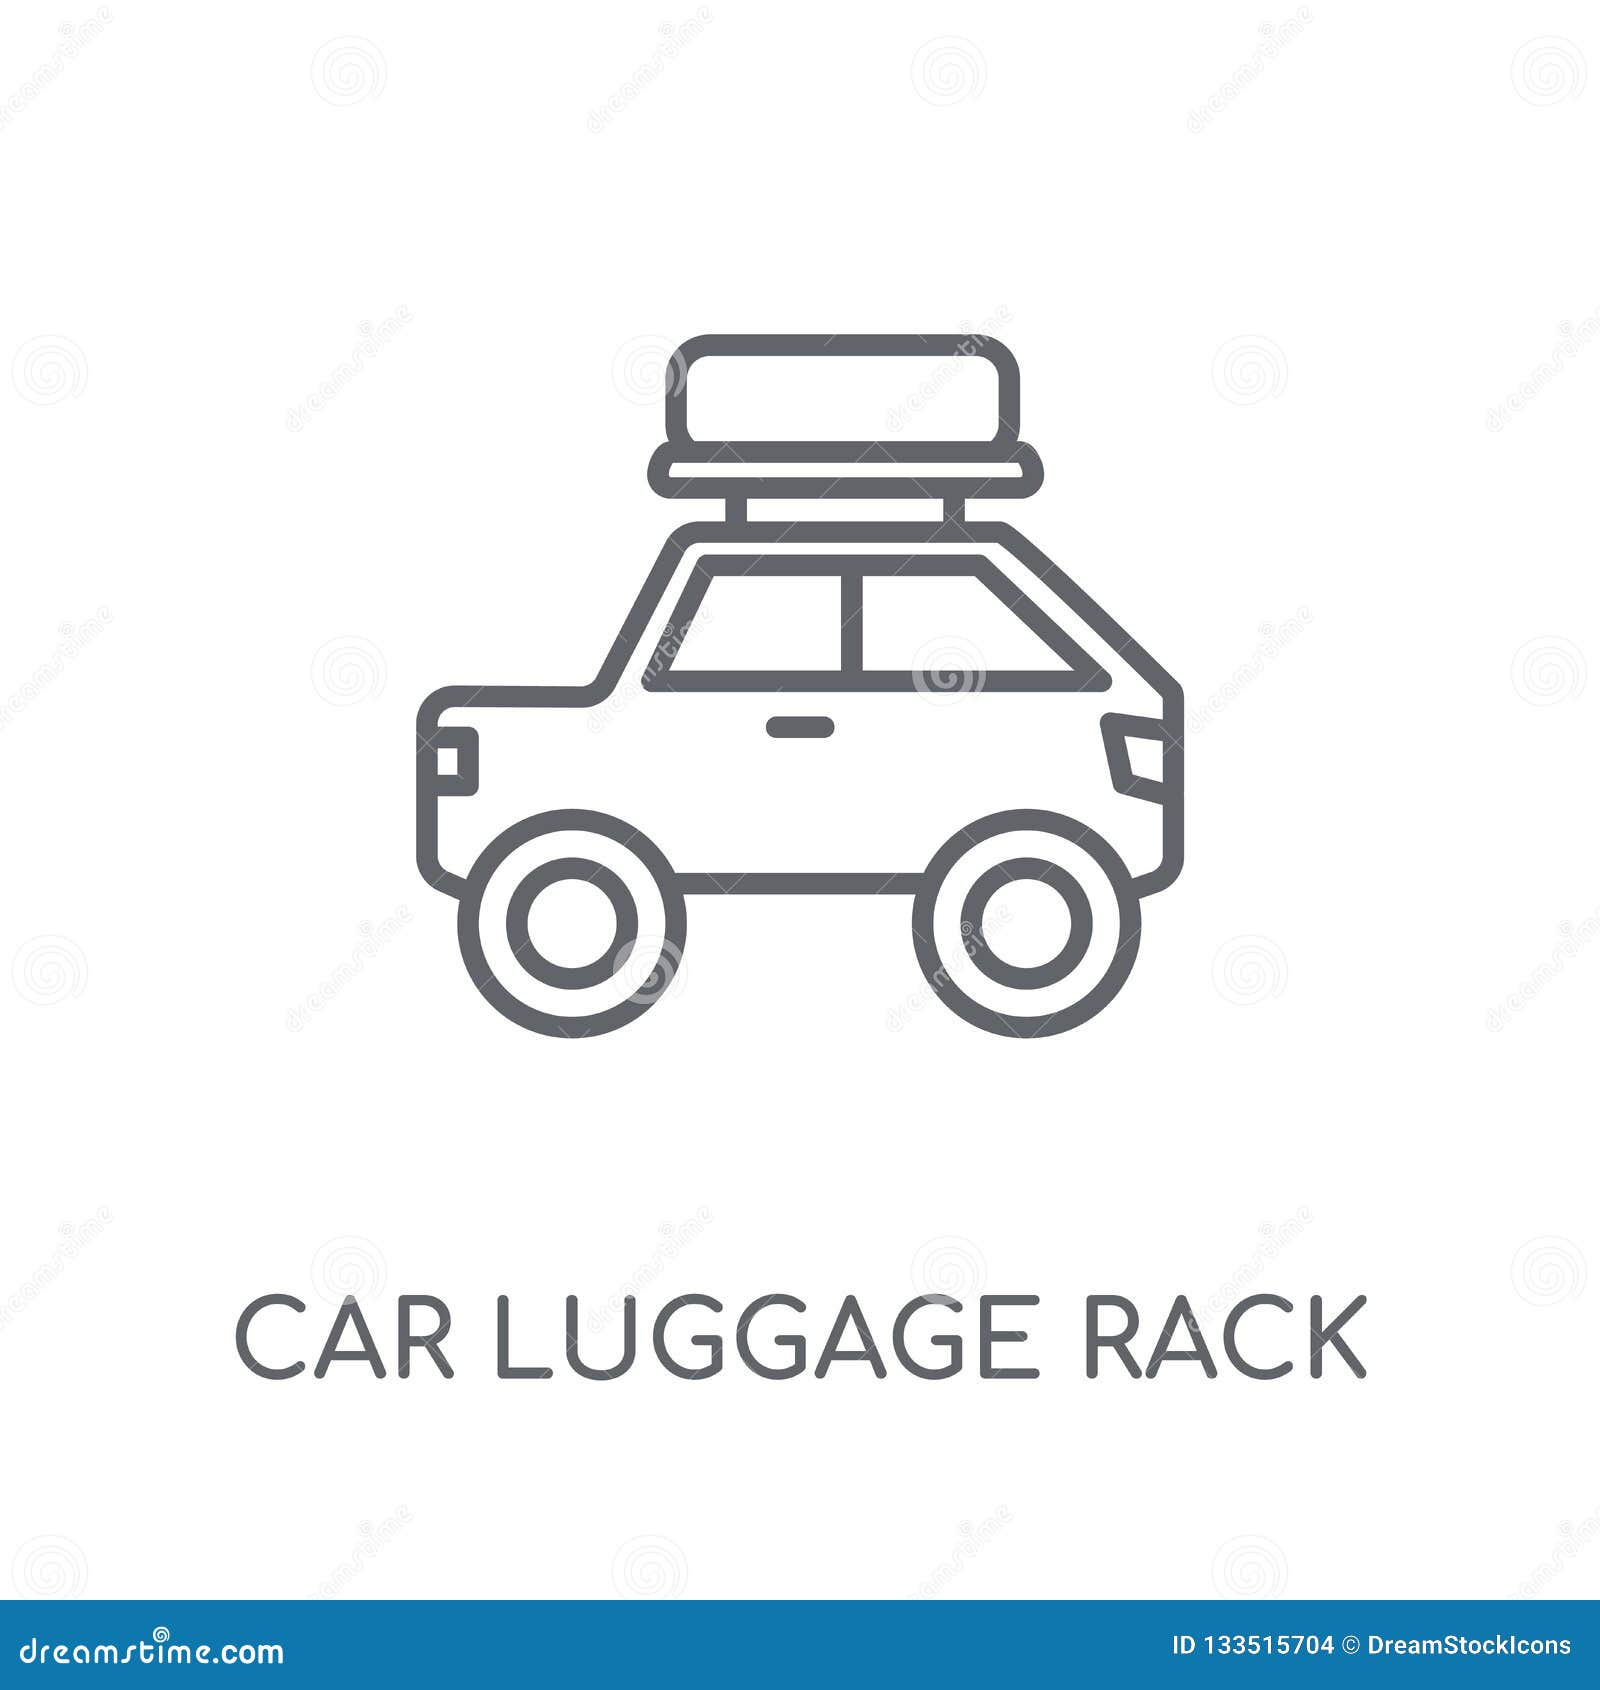 https www dreamstime com car luggage rack linear icon modern outline lo logo concept white background parts collection suitable use web apps image133515704